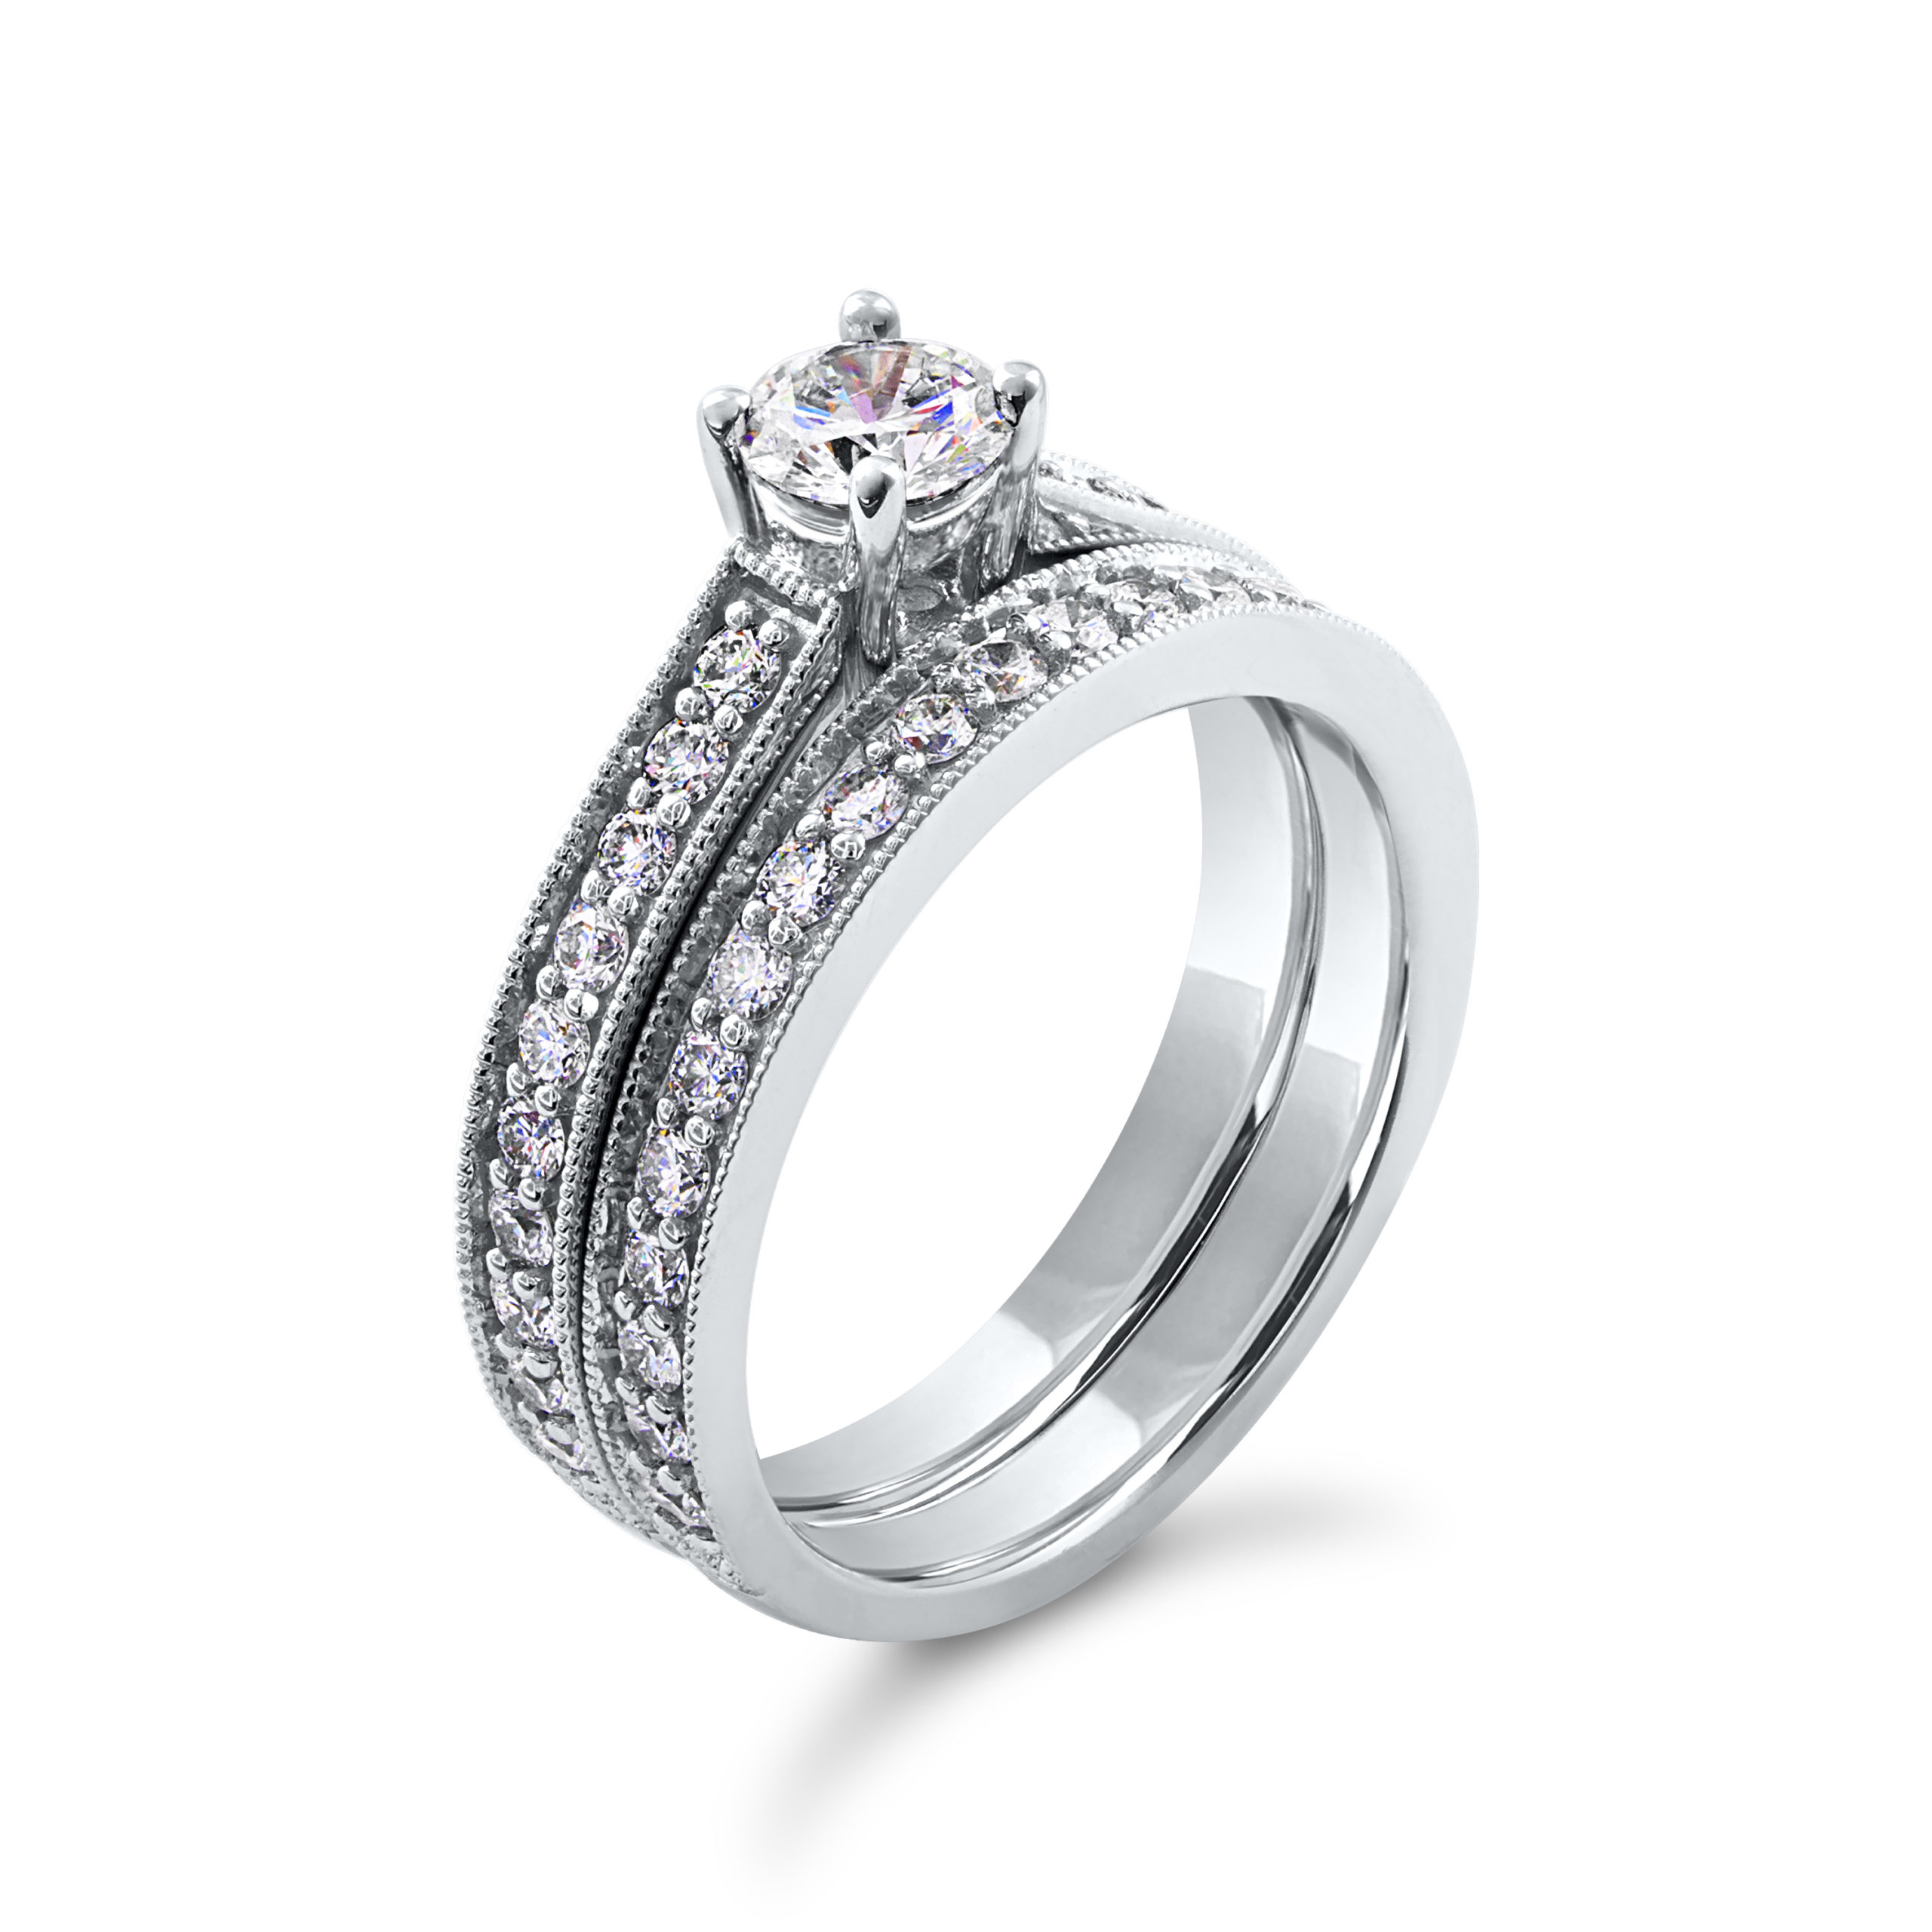 Facets of Fire Diamond Engagement Ring Set